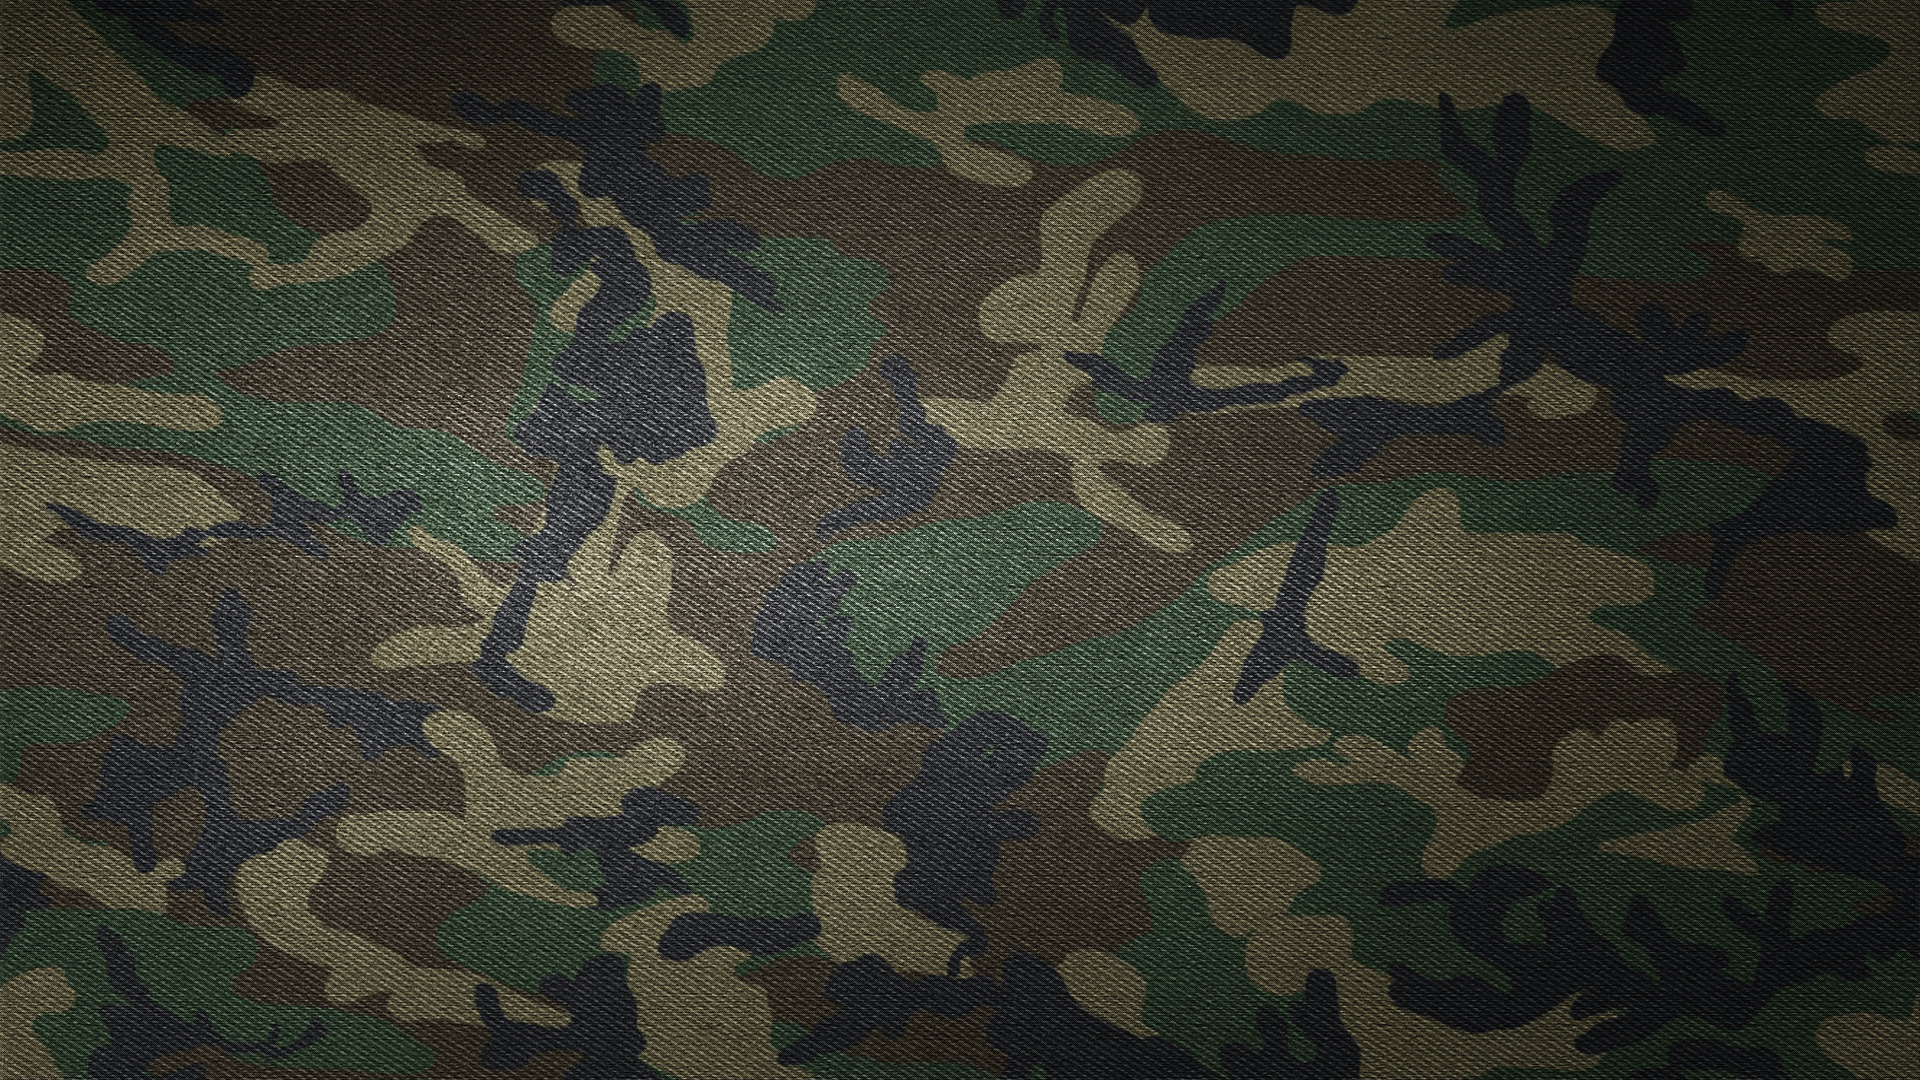 camouflage wallpaper,military camouflage,camouflage,pattern,uniform,green